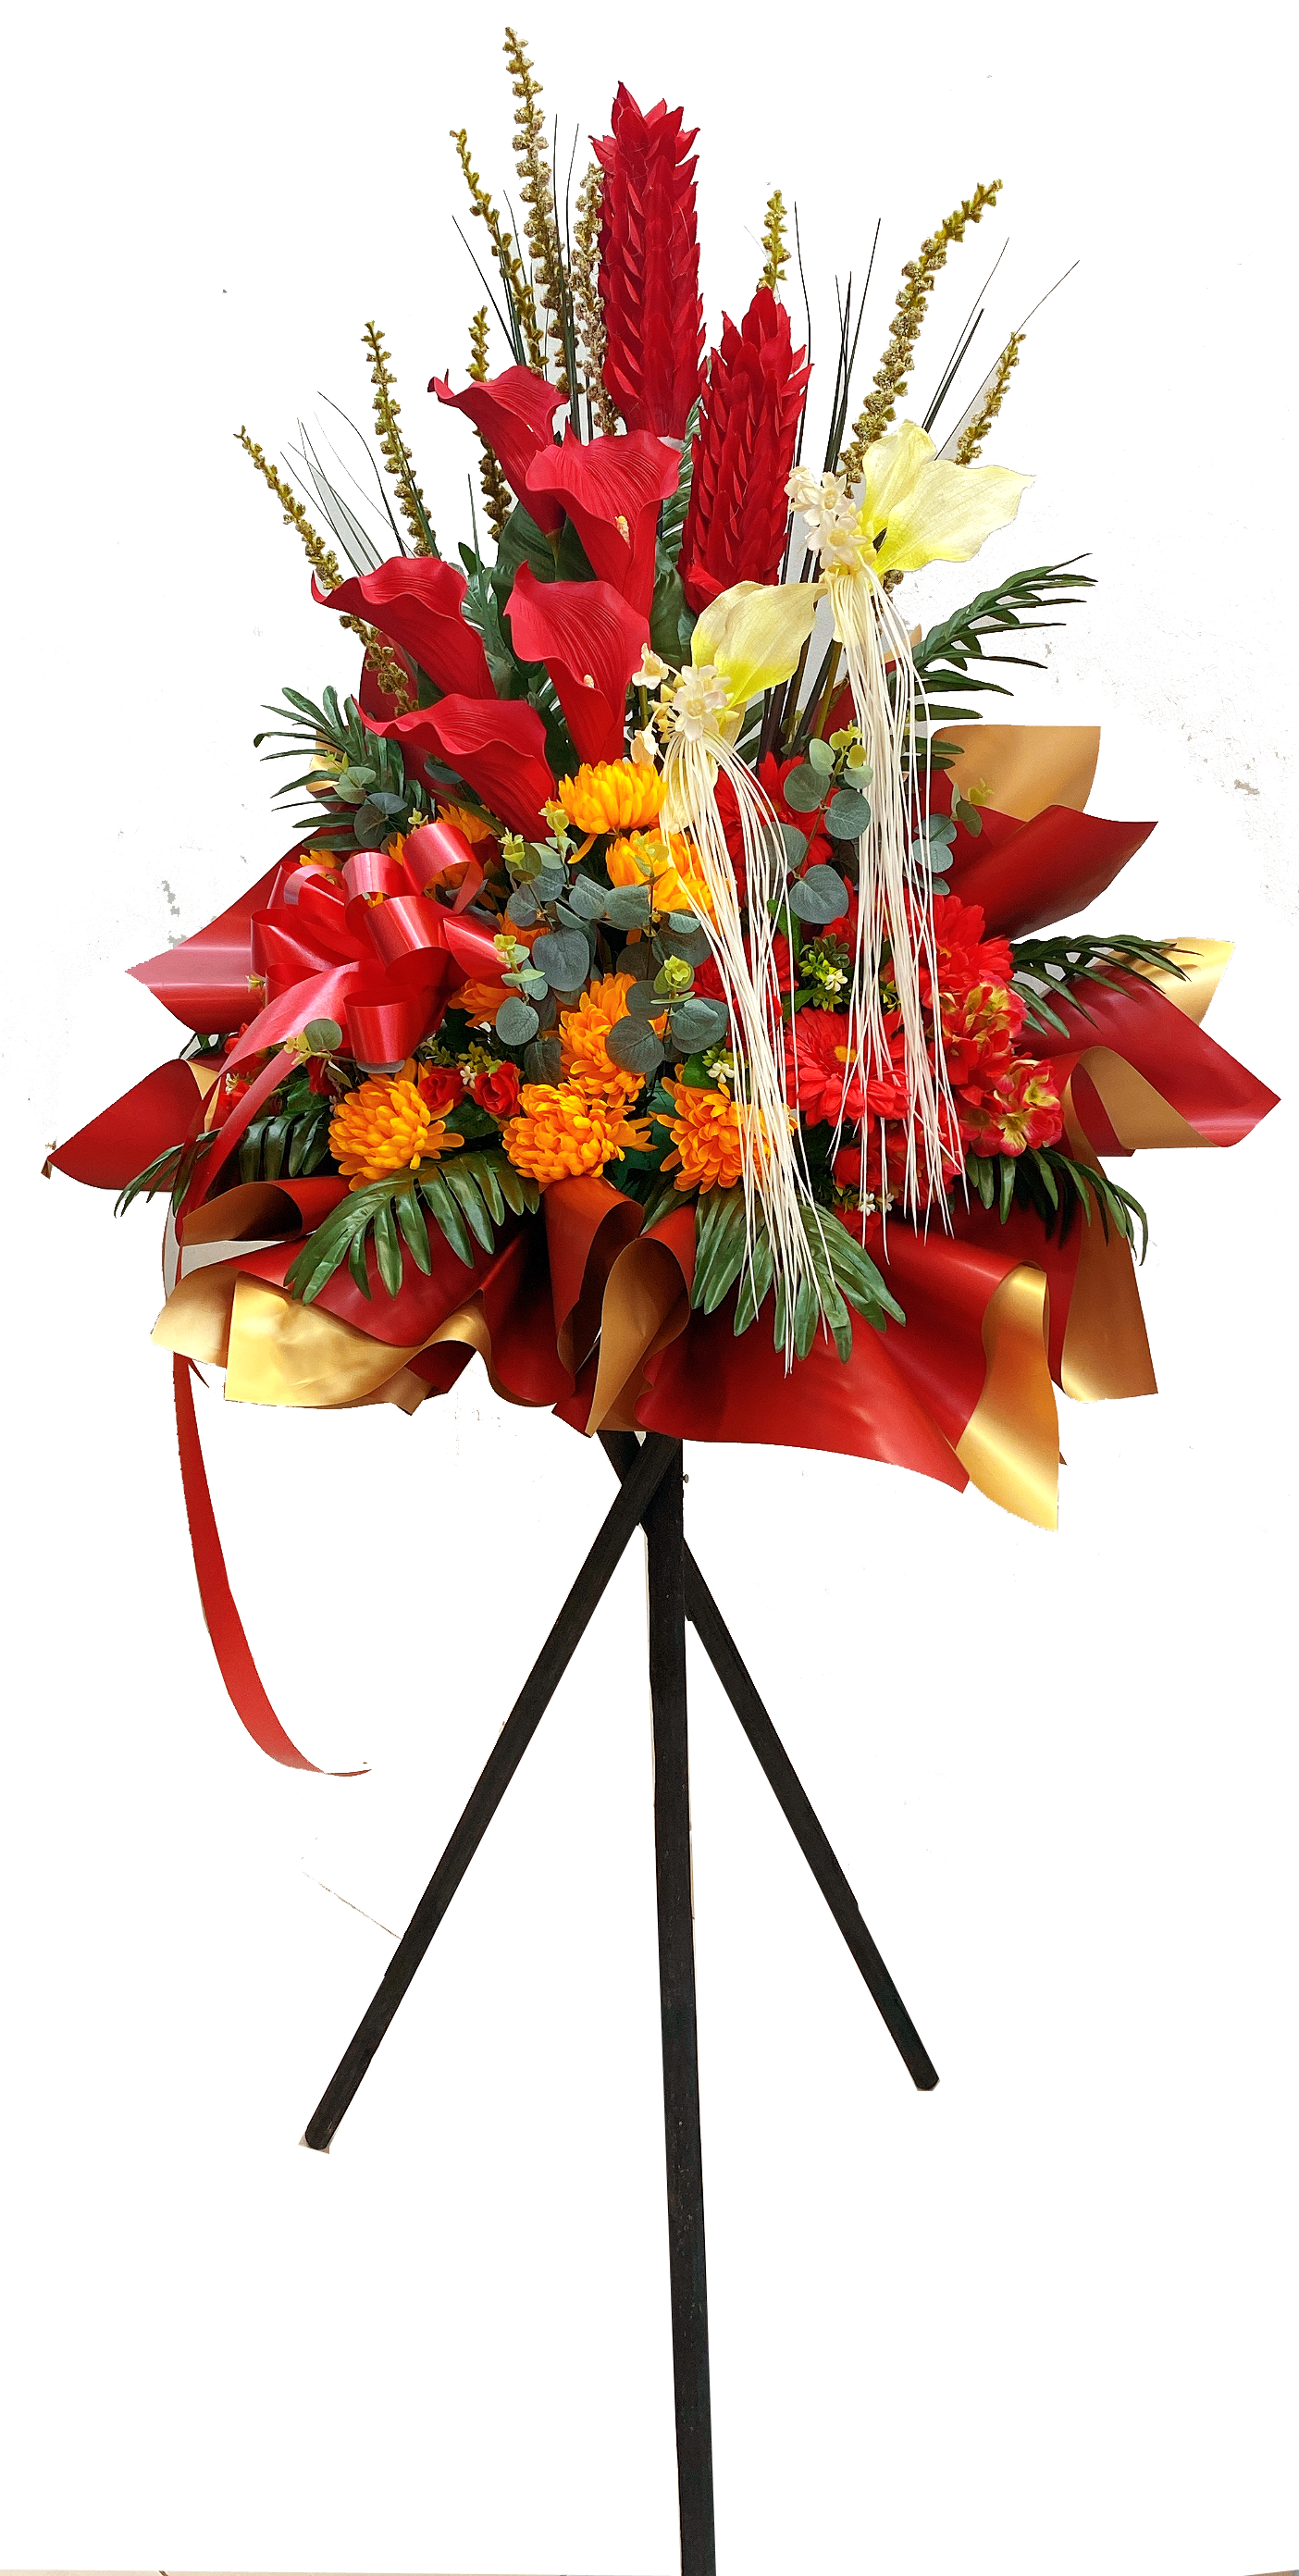 Opening Stand 061 - ARTIFICIAL FLOWER (RM 200.00)